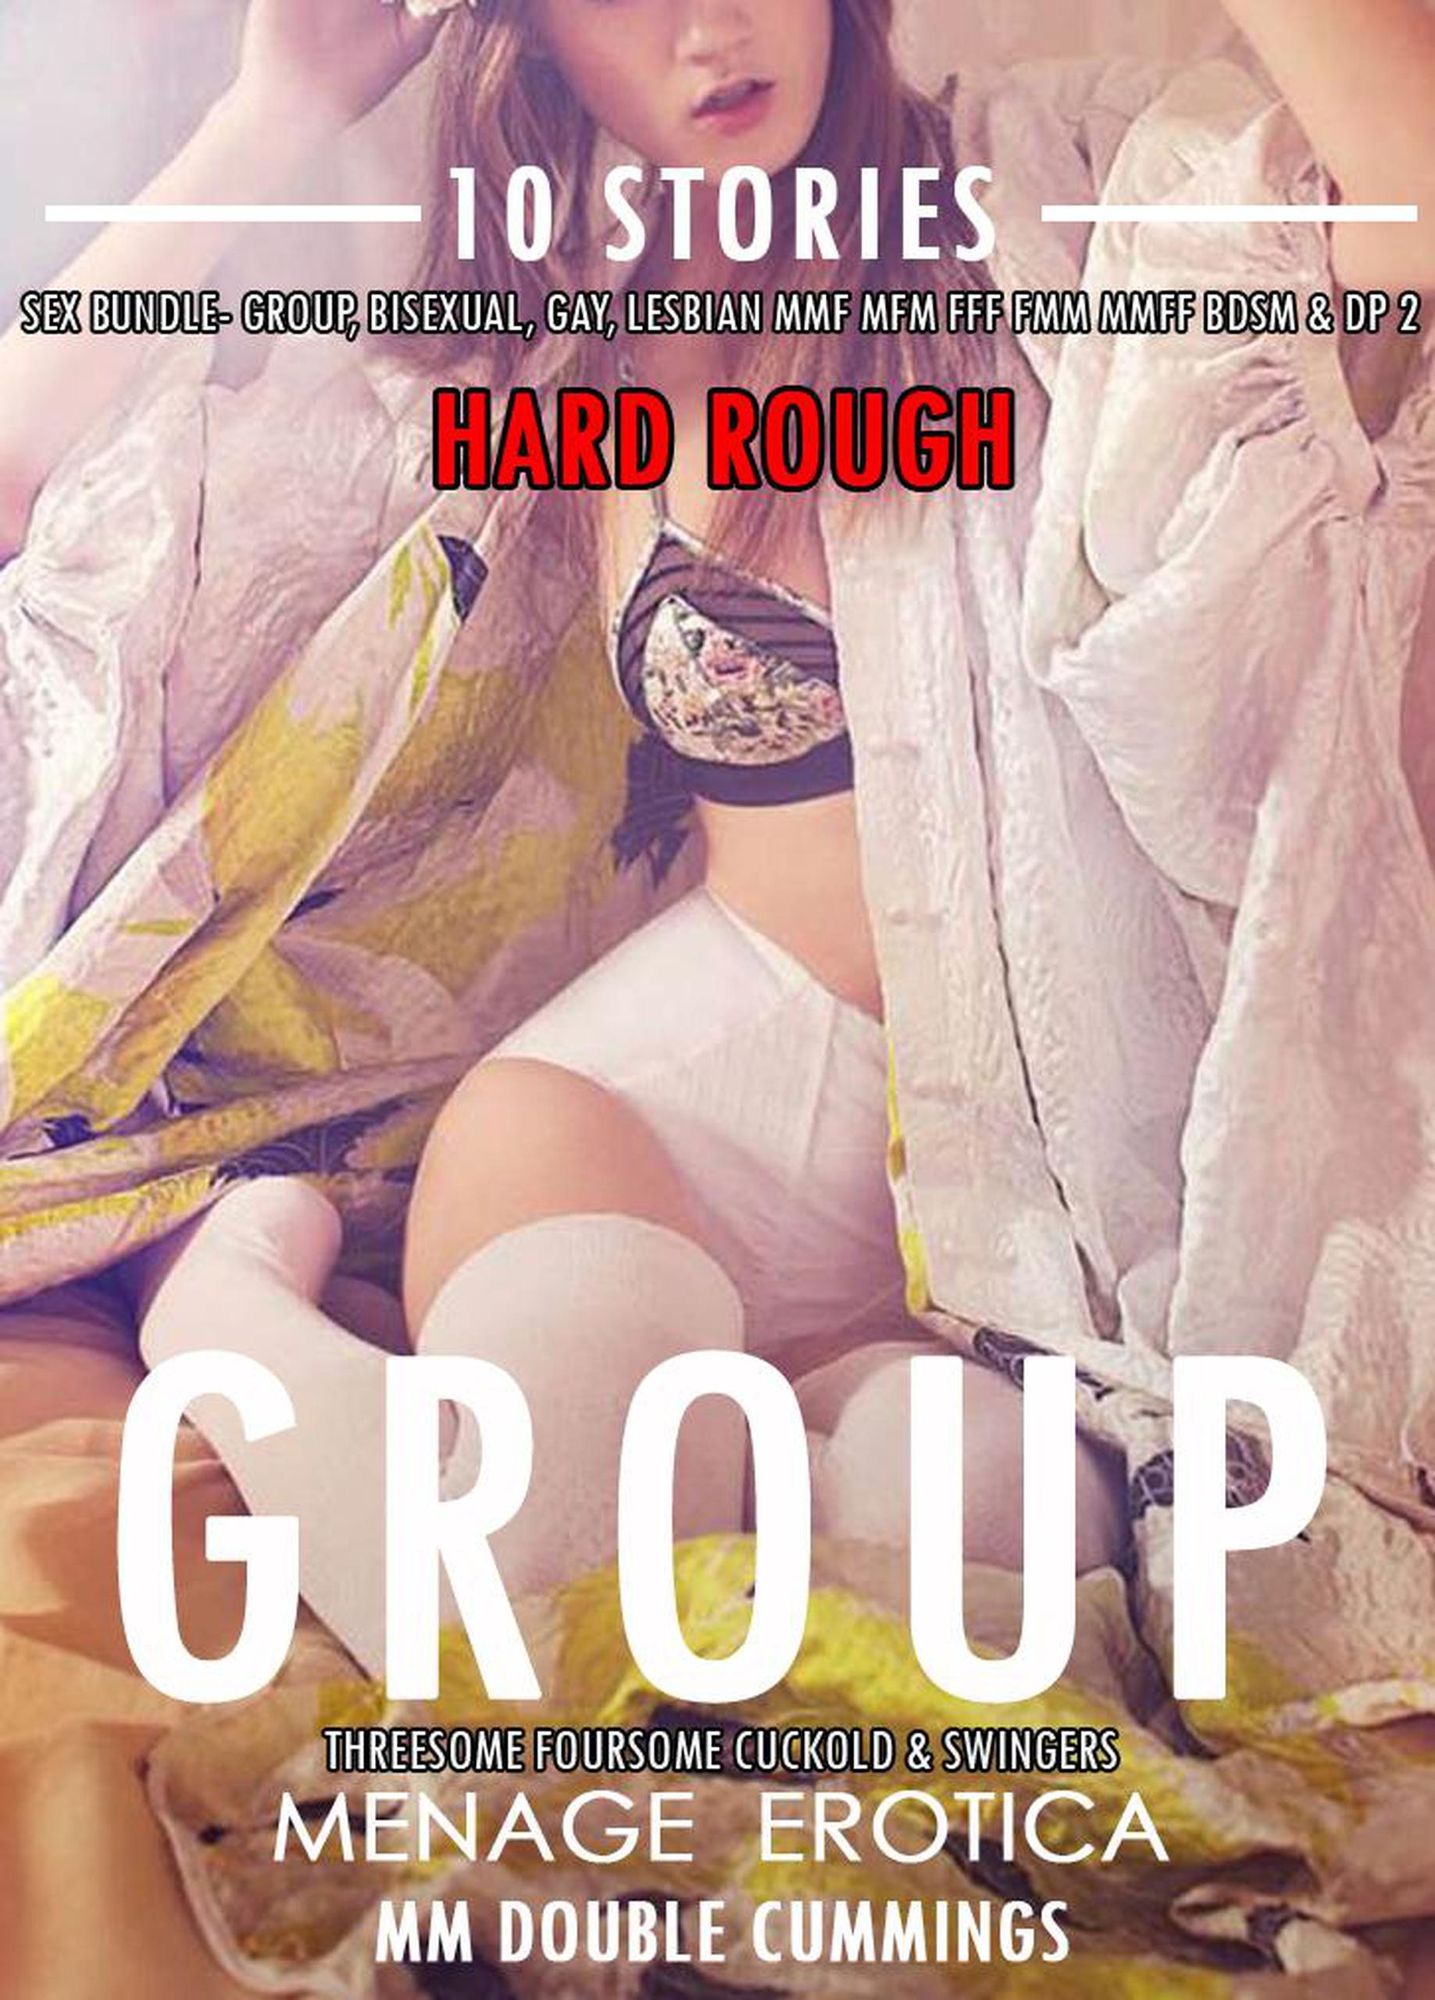 Hard Rough Menage Erotica Sex Bundle- Group, Bisexual, Gay, Lesbian MMF MFM FFF FMM MMFF BDSM and DP 2 (Threesome Foursome Cuckold and Swingers, #1) von MM Double Cummings picture image